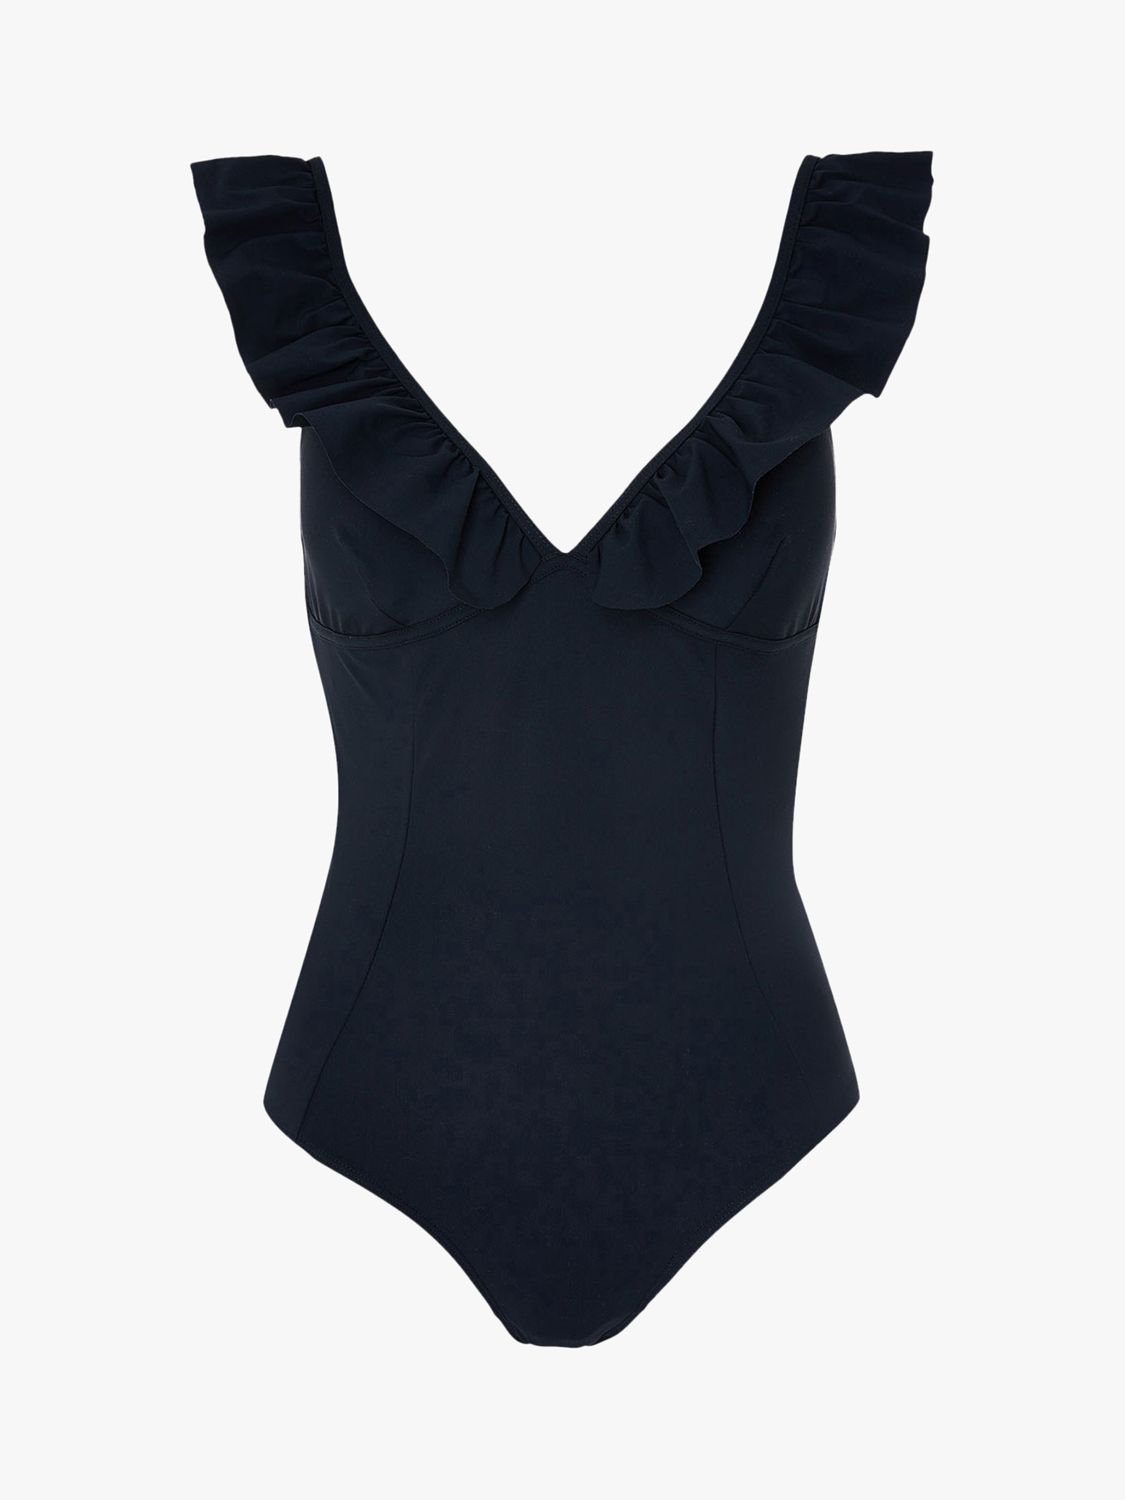 Buy Accessorize Ruffle Detail Shaping Swimsuit, Black Online at johnlewis.com